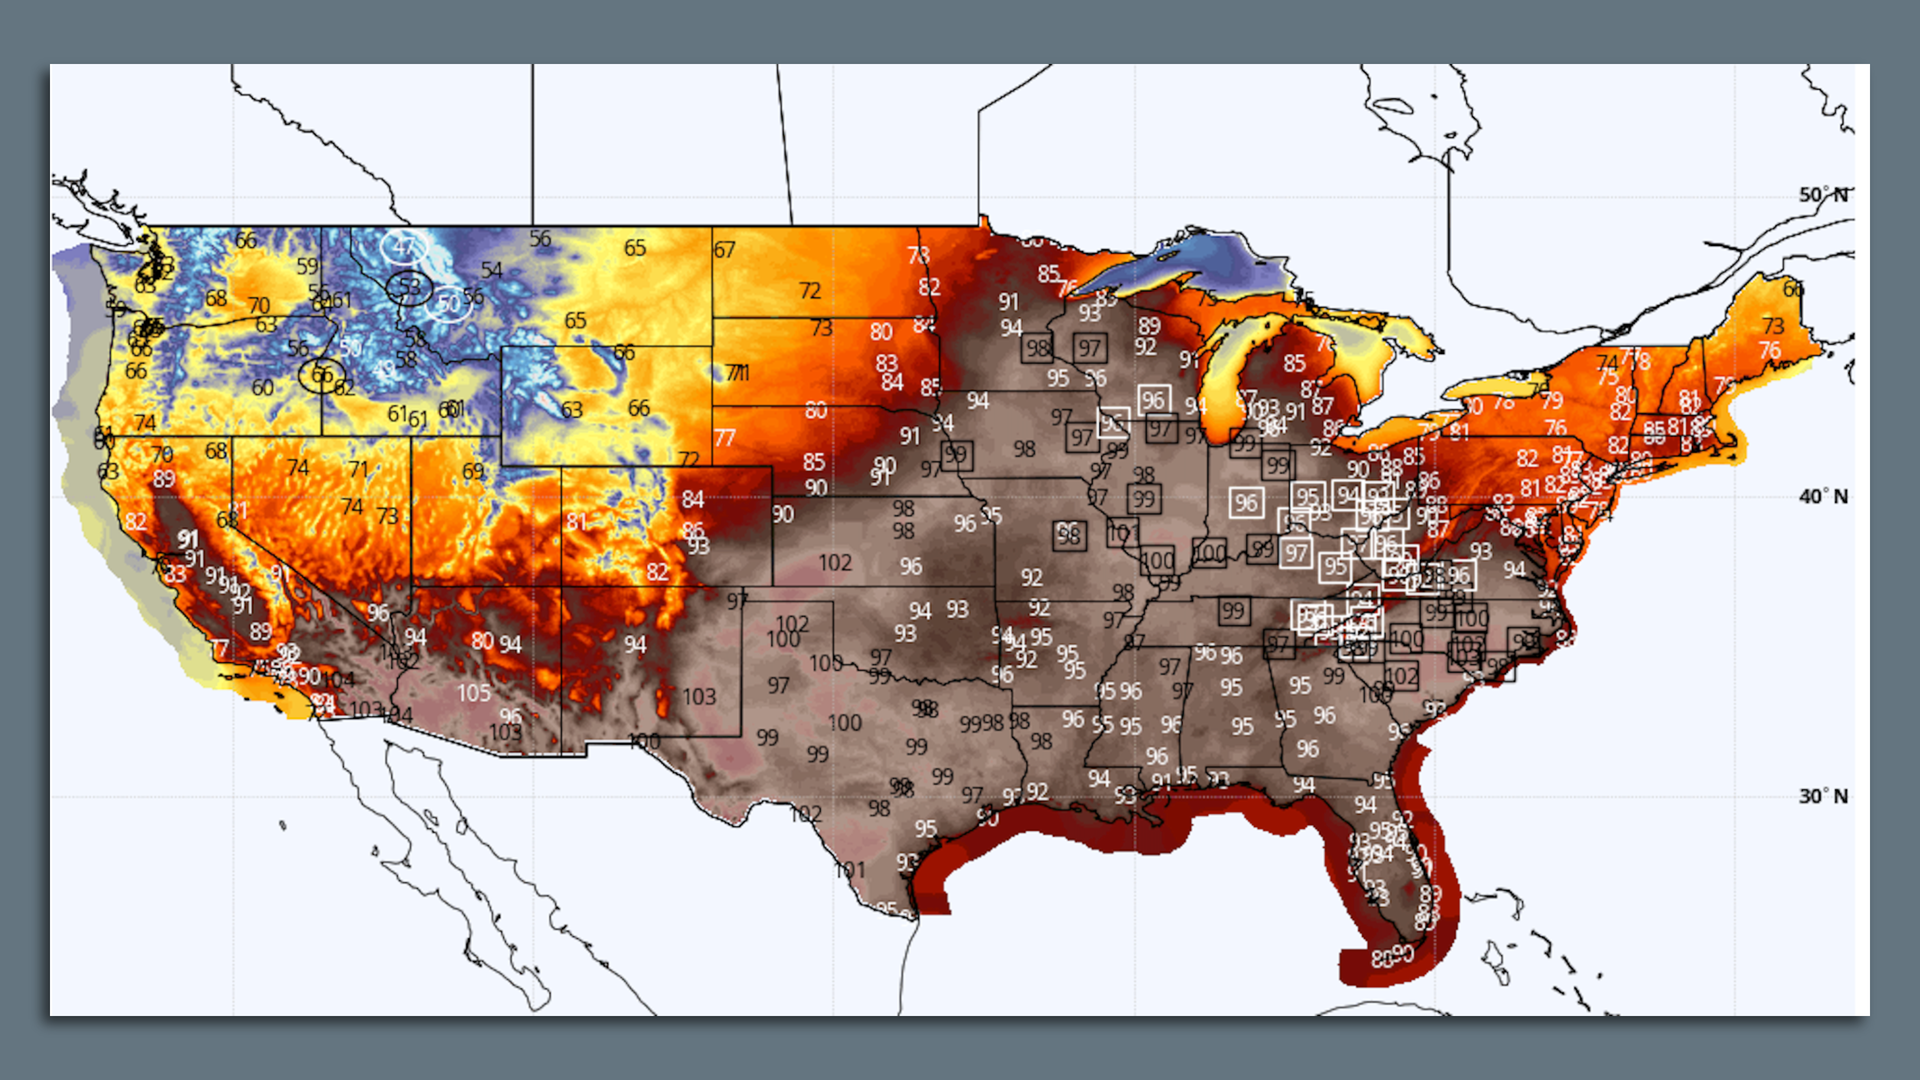 Forecast map for high temperatures on Tuesday June 14, 2022.